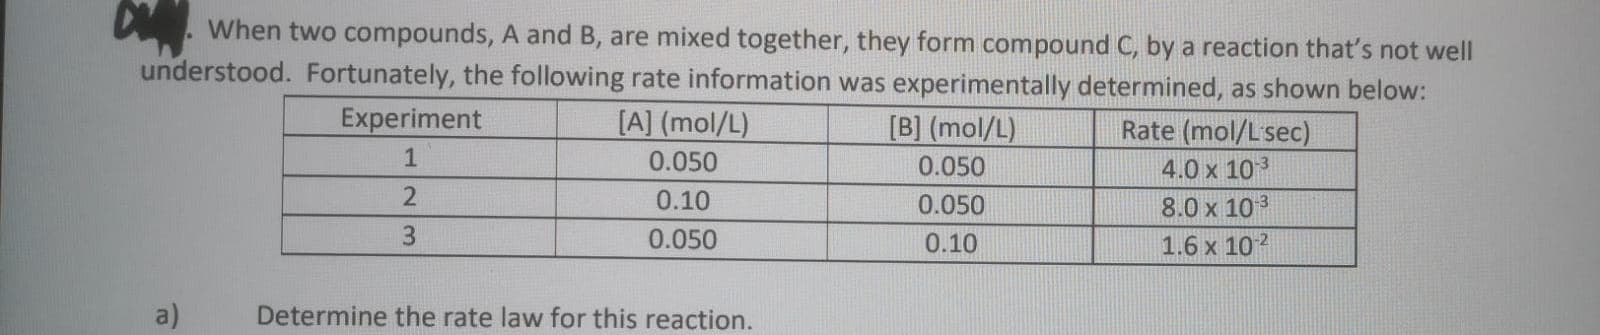 . When two compounds, A and B, are mixed together, they form compound C, by a reaction that's not well
understood. Fortunately, the following rate information was experimentally determined, as shown below:
Experiment
[A] (mol/L)
[B] (mol/L)
Rate (mol/Lsec)
1
0.050
0.050
4.0 x 103
0.10
0.050
8.0 x 10 3
3.
0.050
0.10
1.6 x 102
a)
Determine the rate law for this reaction.
